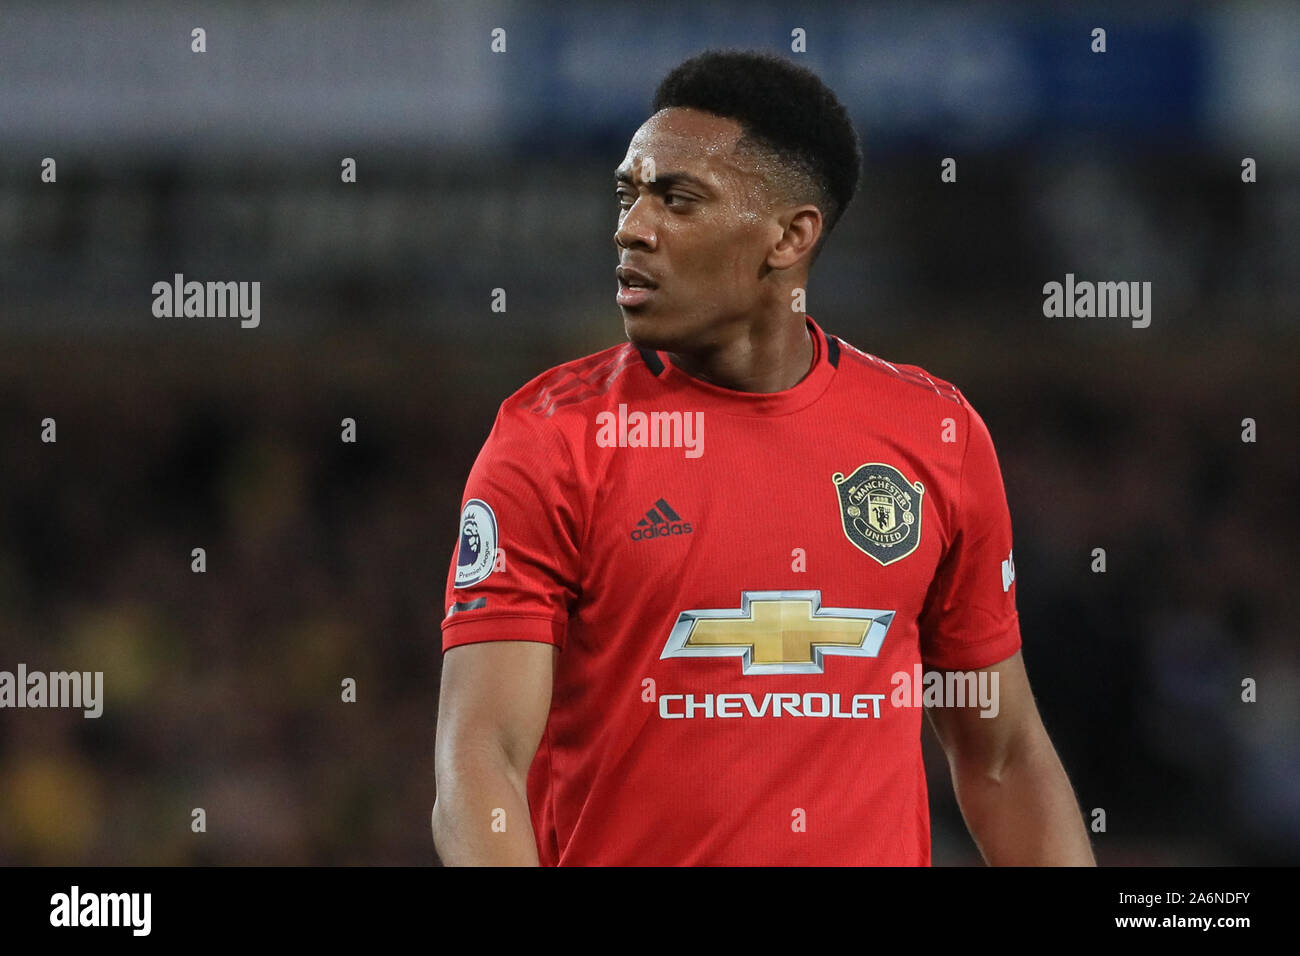 27th October 2019, Carrow Road, Norwich, England; Premier League, Norwich City v Manchester United : Anthony Martial (9) of Manchester United during the game Credit: Mark Cosgrove/News Images Stock Photo